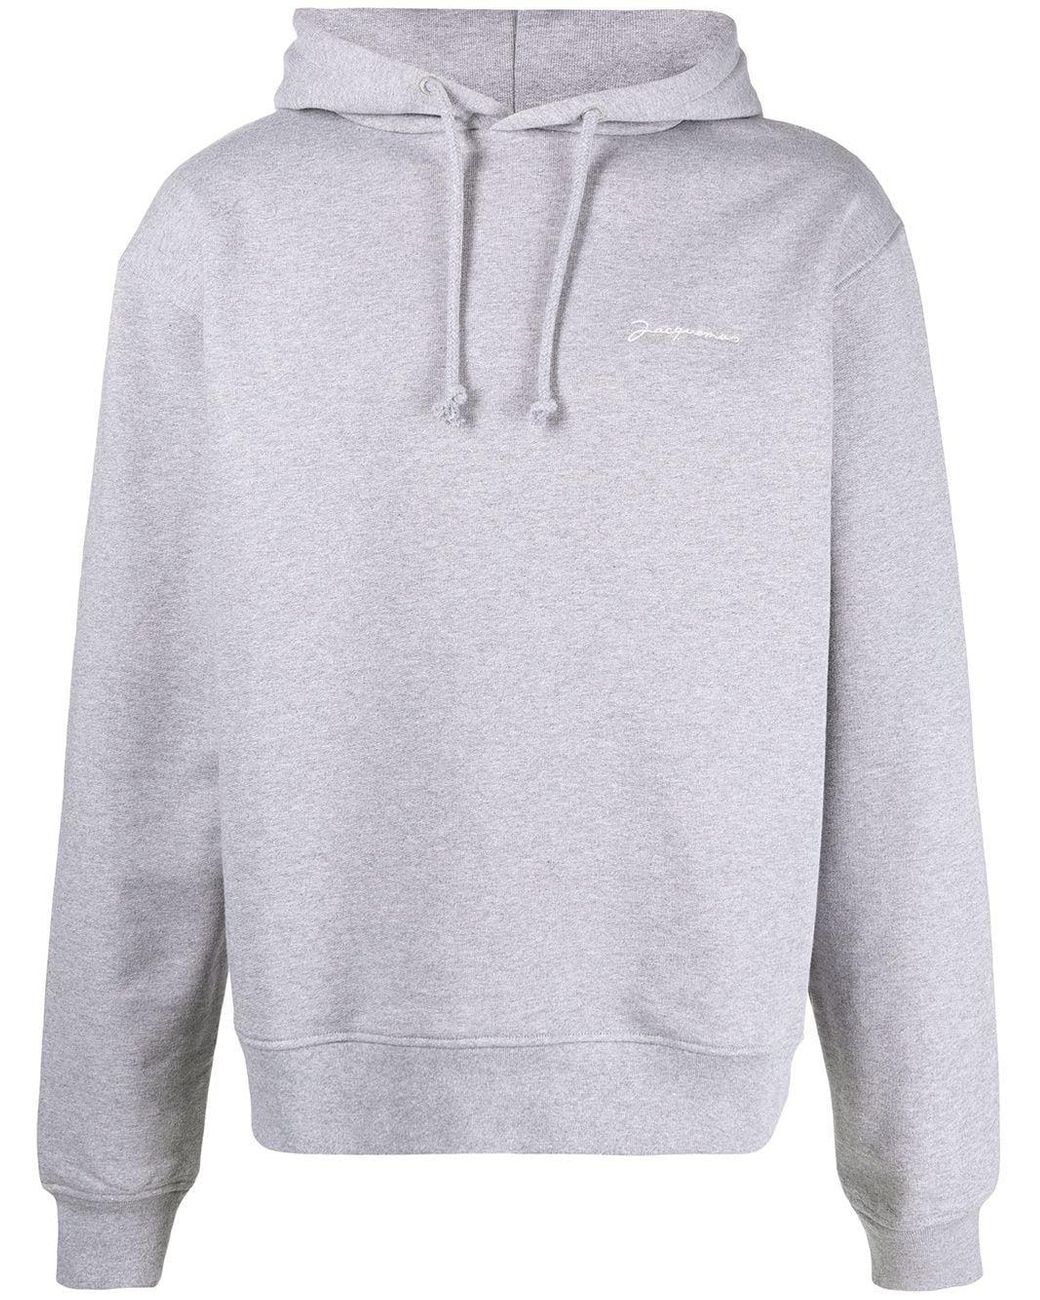 Jacquemus Cotton Logo Embroidered Hoodie in Grey (Gray) for Men - Lyst